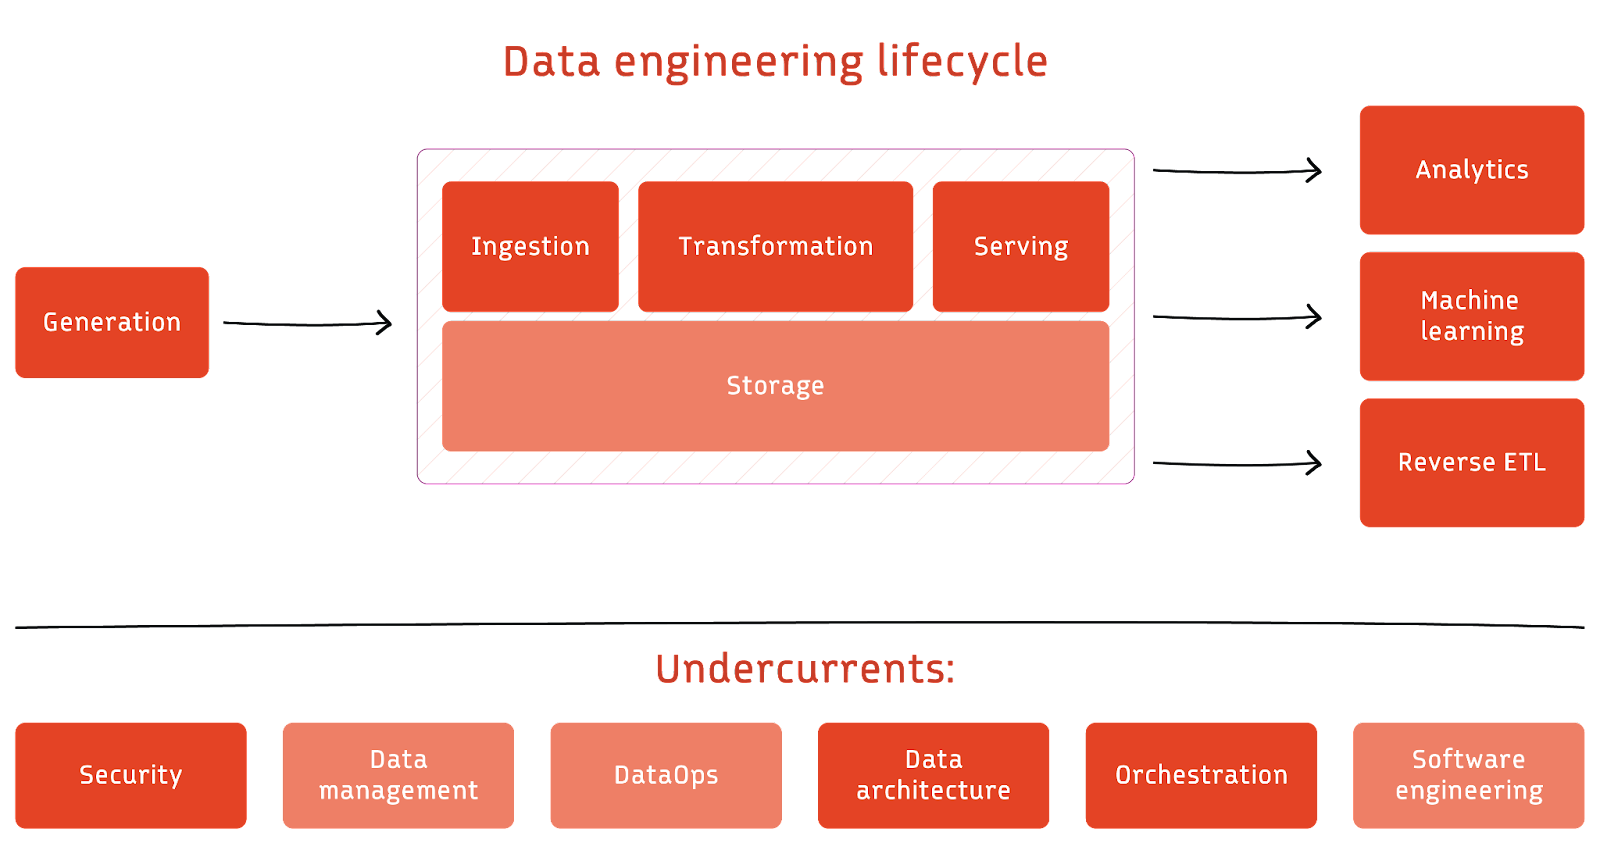 Diagram of the data engineering lifecycle and key principles